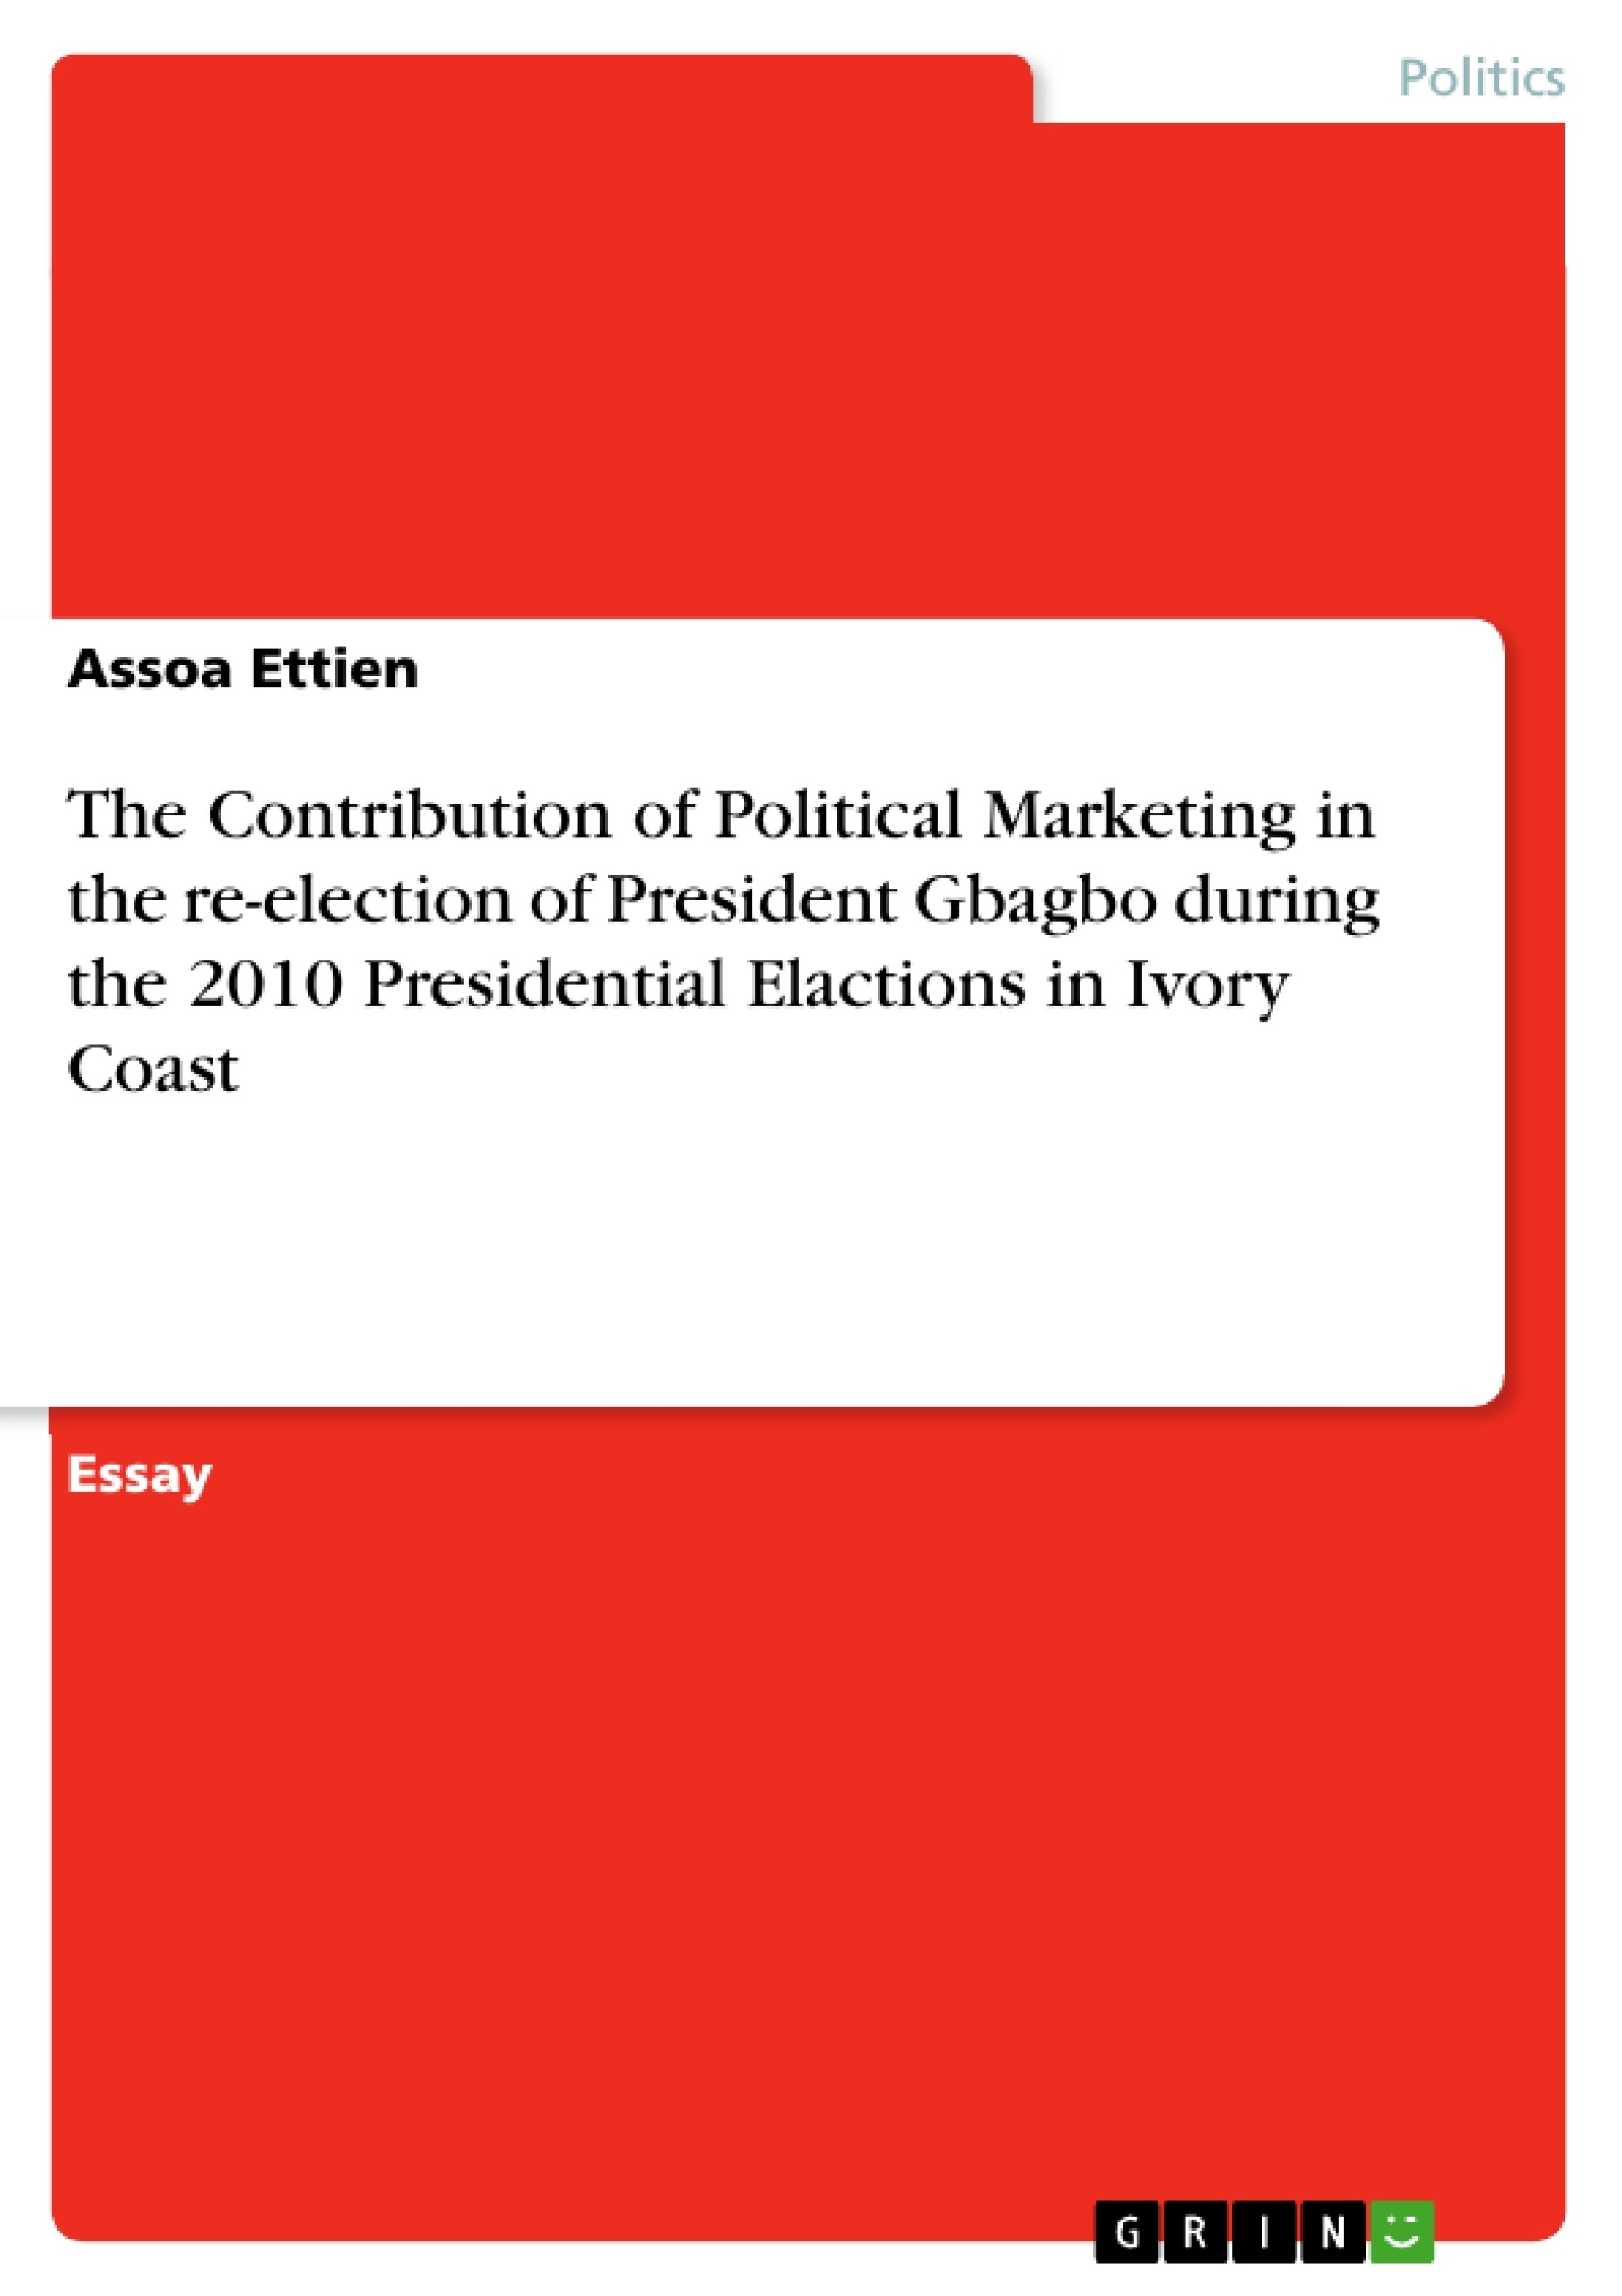 Titre: The Contribution of Political Marketing in the re-election of President Gbagbo during the 2010 Presidential Elactions in Ivory Coast